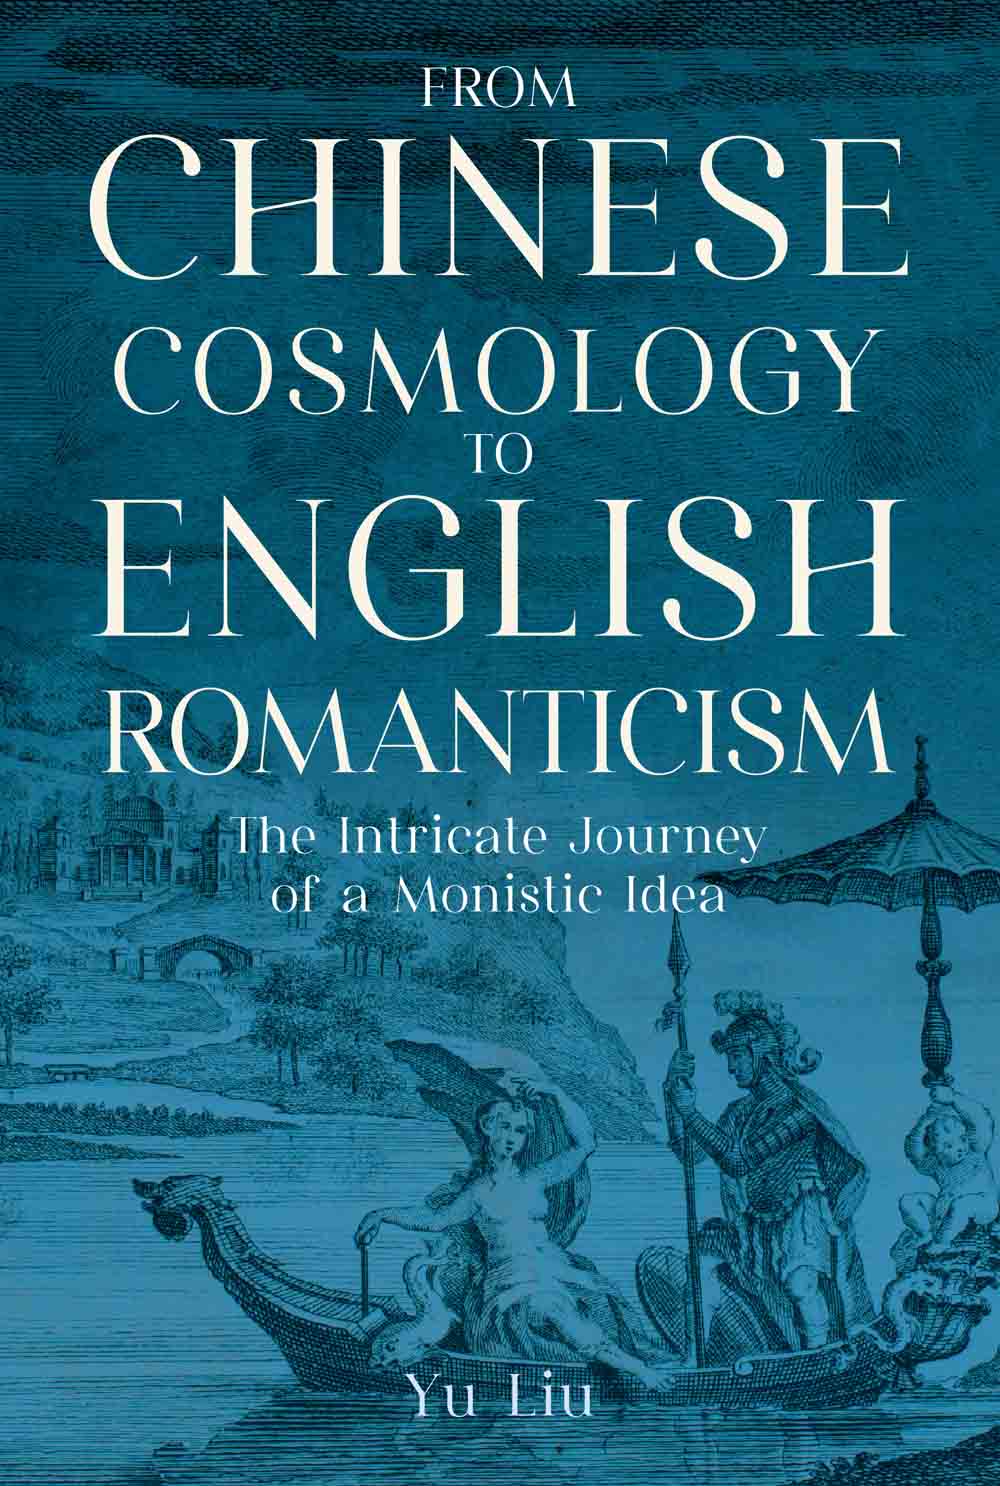 From Chinese Cosmology to English Romanticism: The Intricate Journey of a Monistic Idea